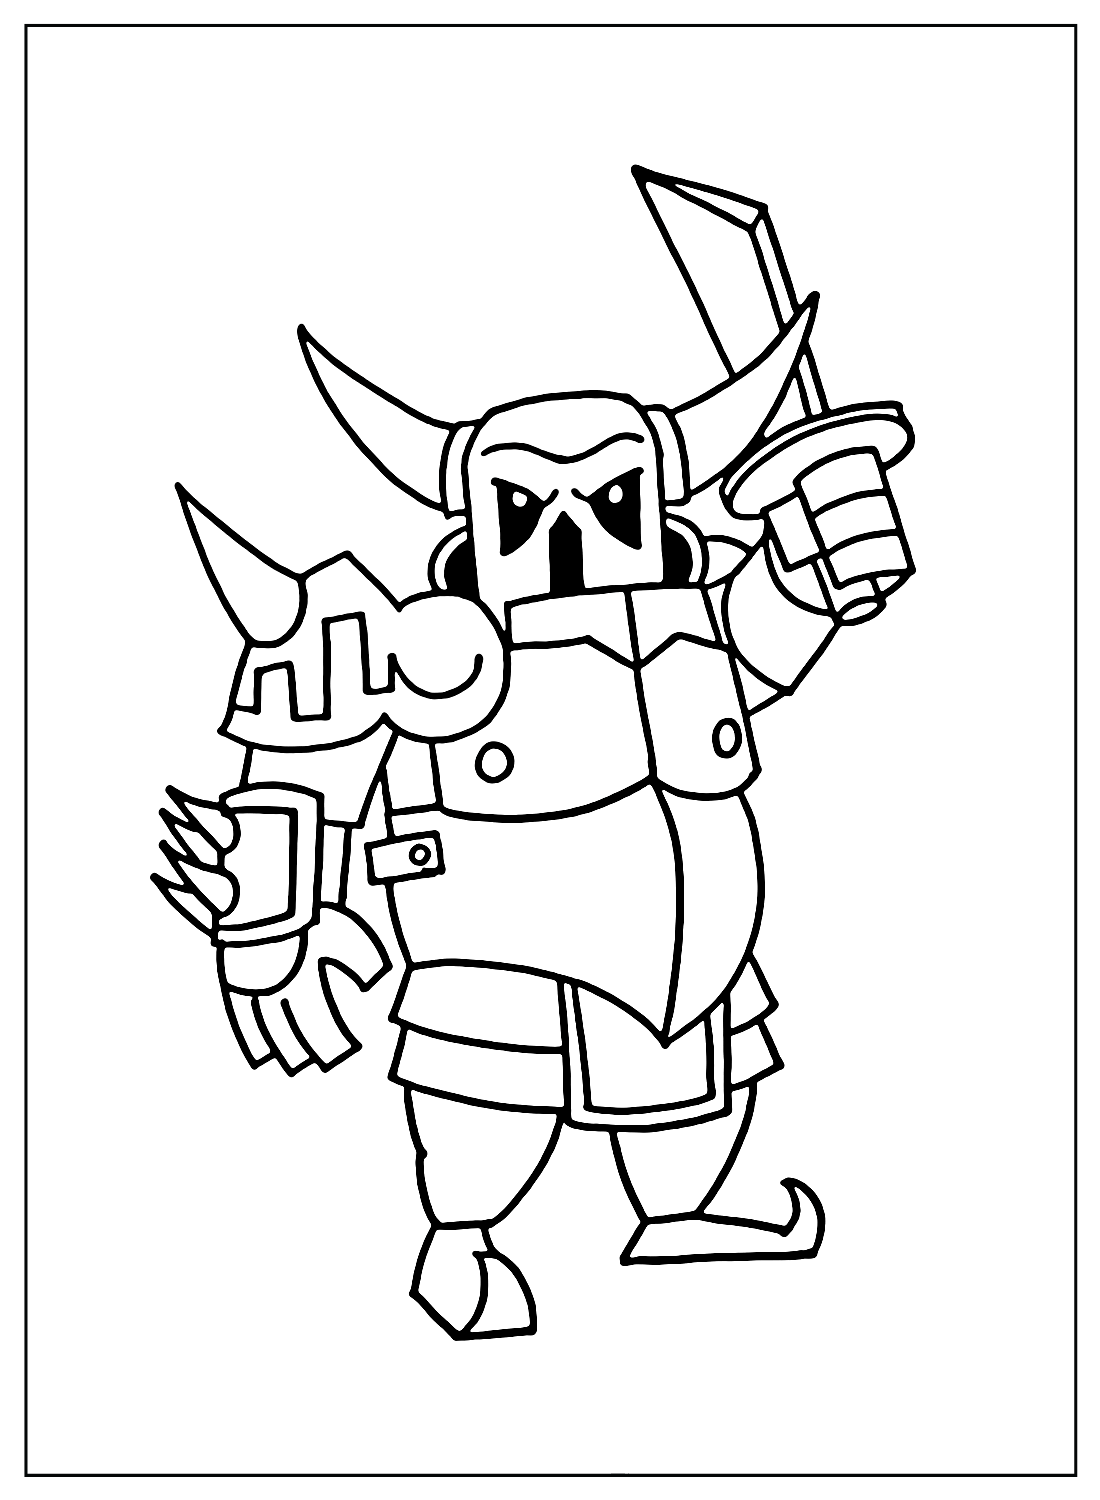 Clash of Clans Pekka Coloring Pages from Clash of Clans